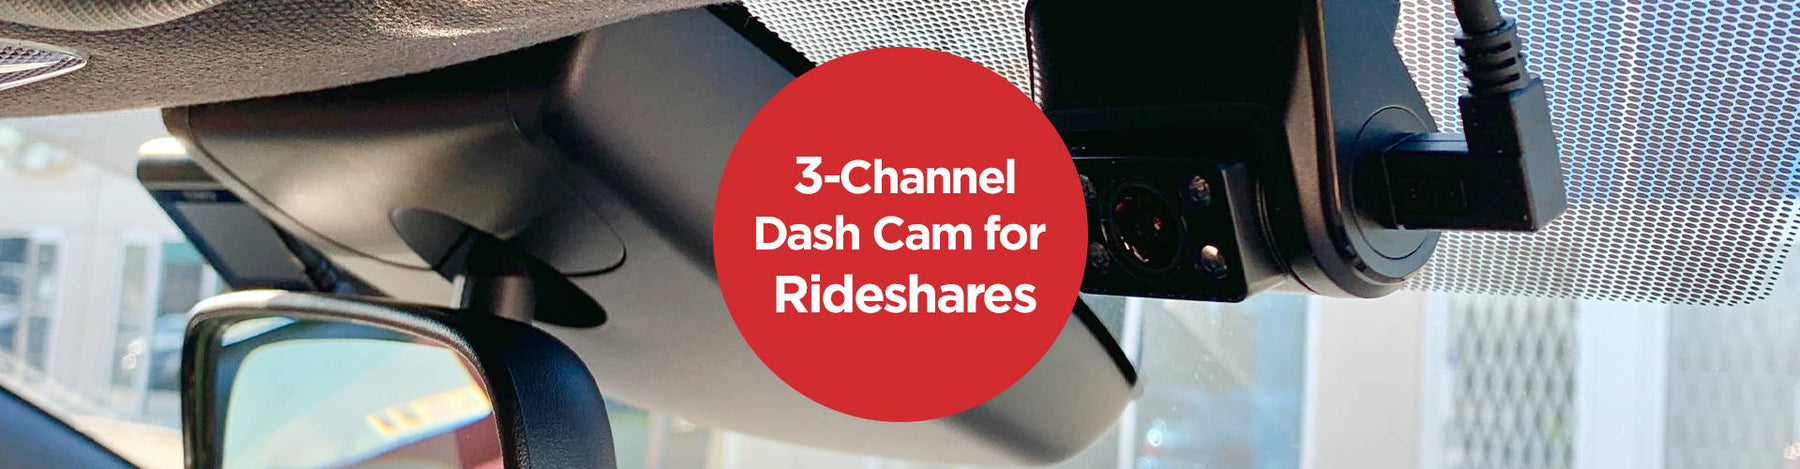 3-Channel Complete Coverage for Rideshares - - BlackboxMyCar